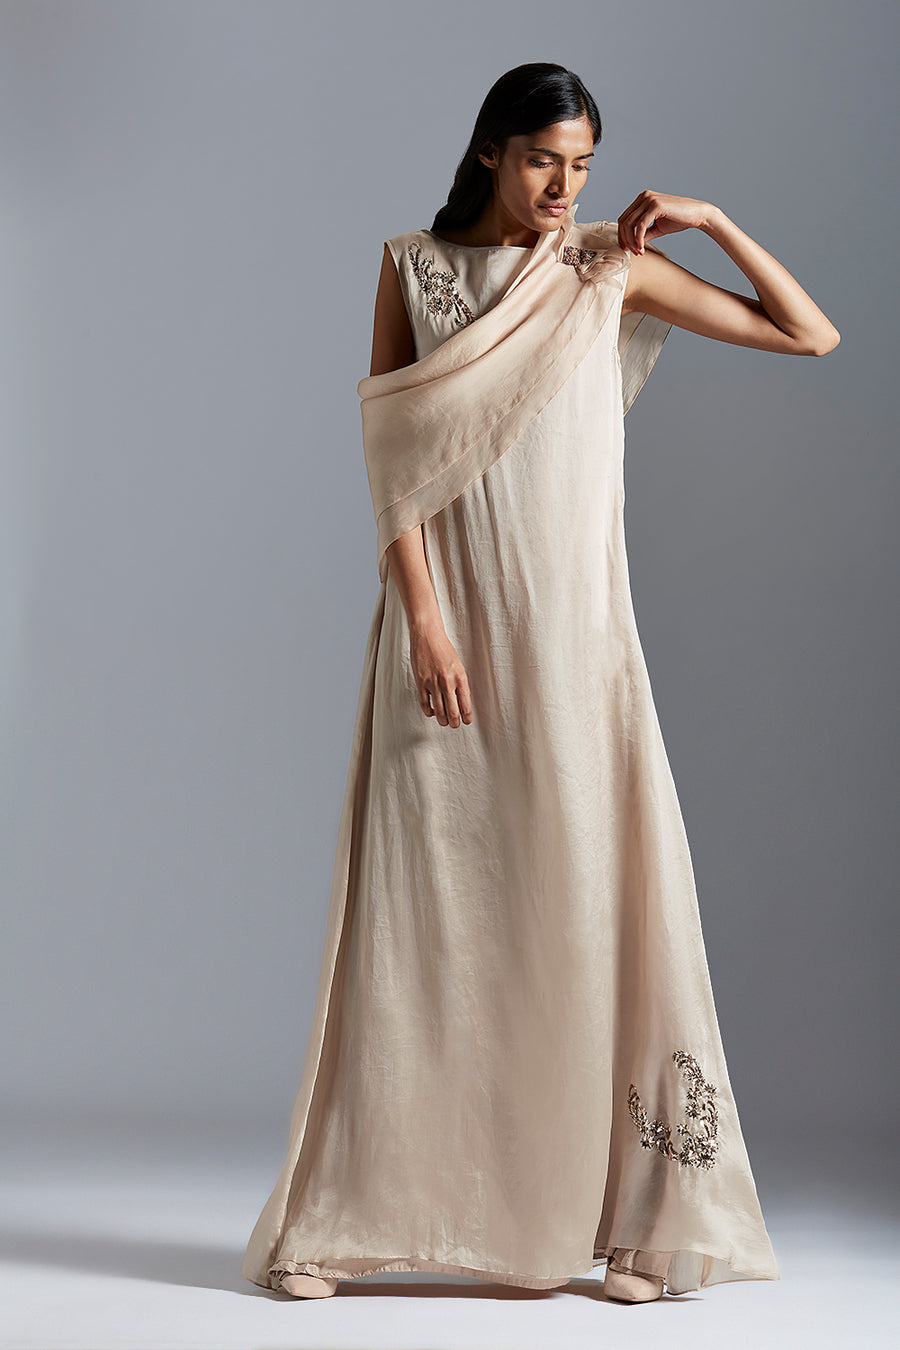 A - Line Dress With Mukaish Motif And Mademe Cape